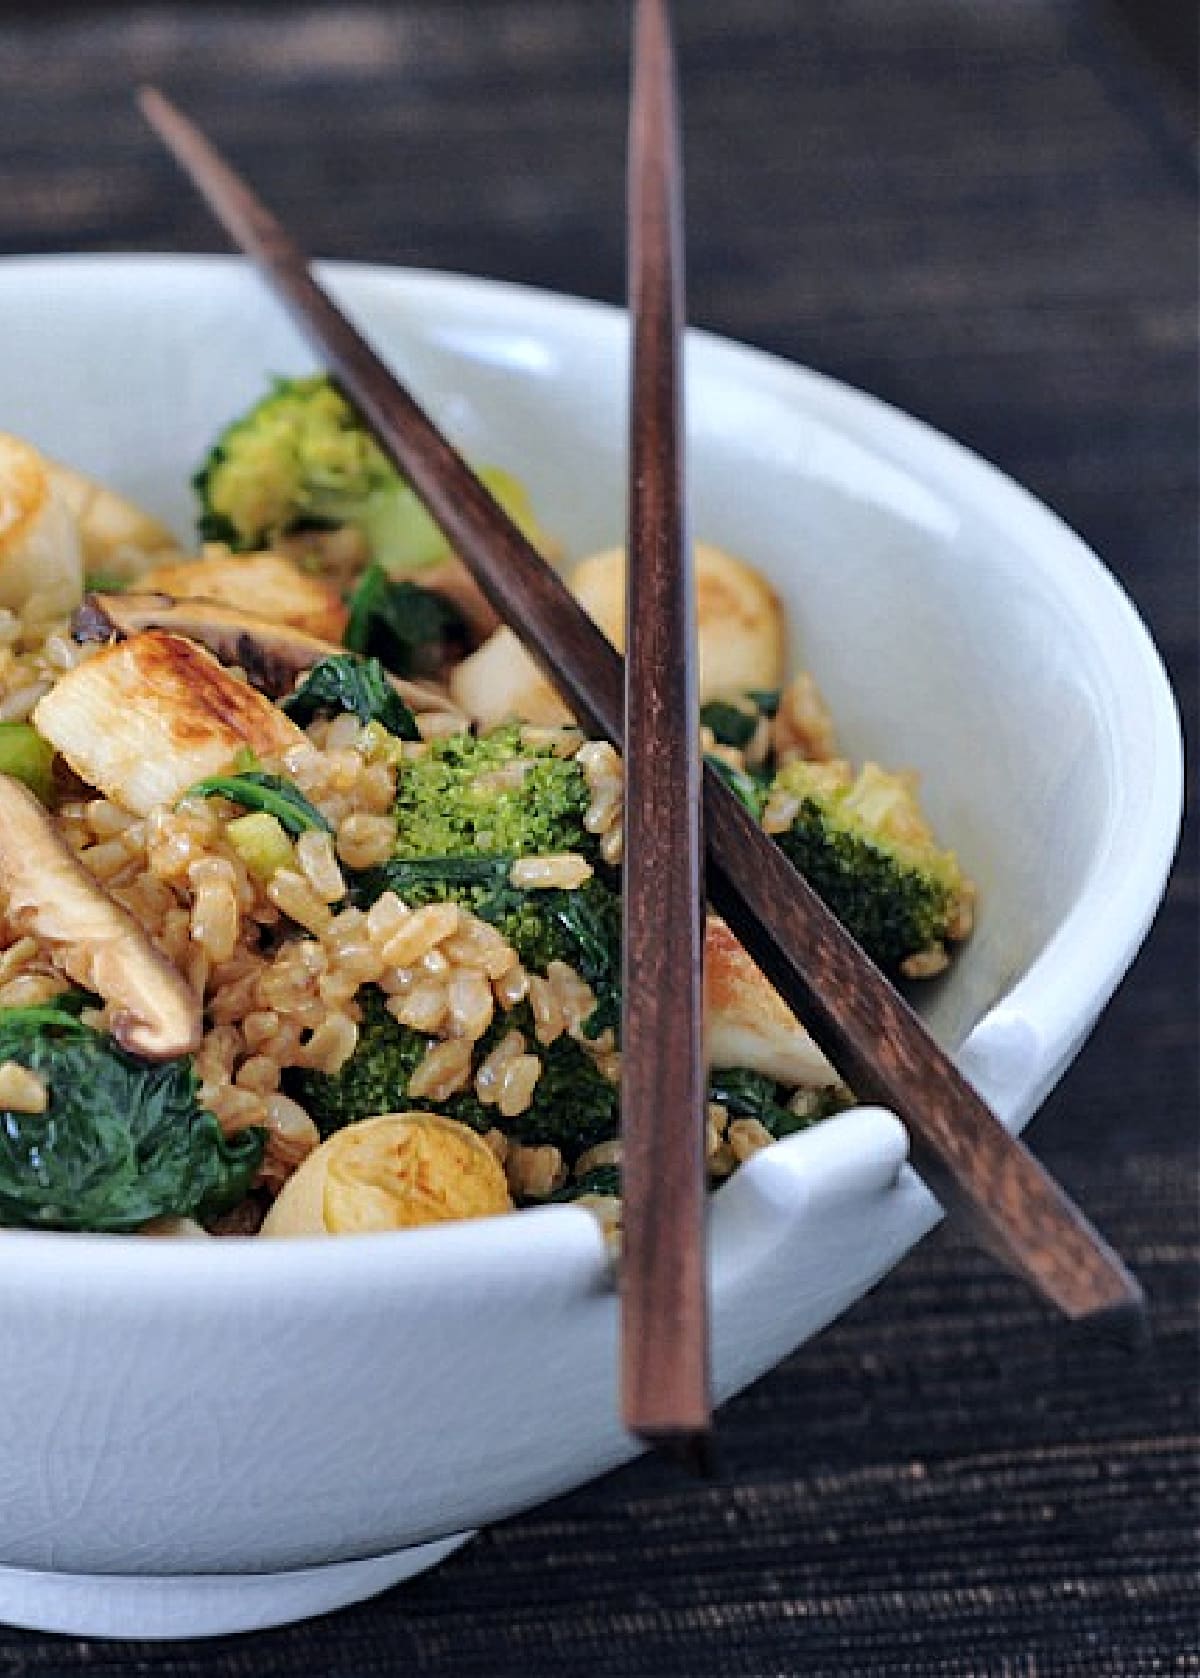 Vegan scallop fried rice in a bowl with chopsticks: vegan "scallops" made from hearts of palm, sliced shiitake mushroom, broccoli trees, sliced green onion, golden fried rice.